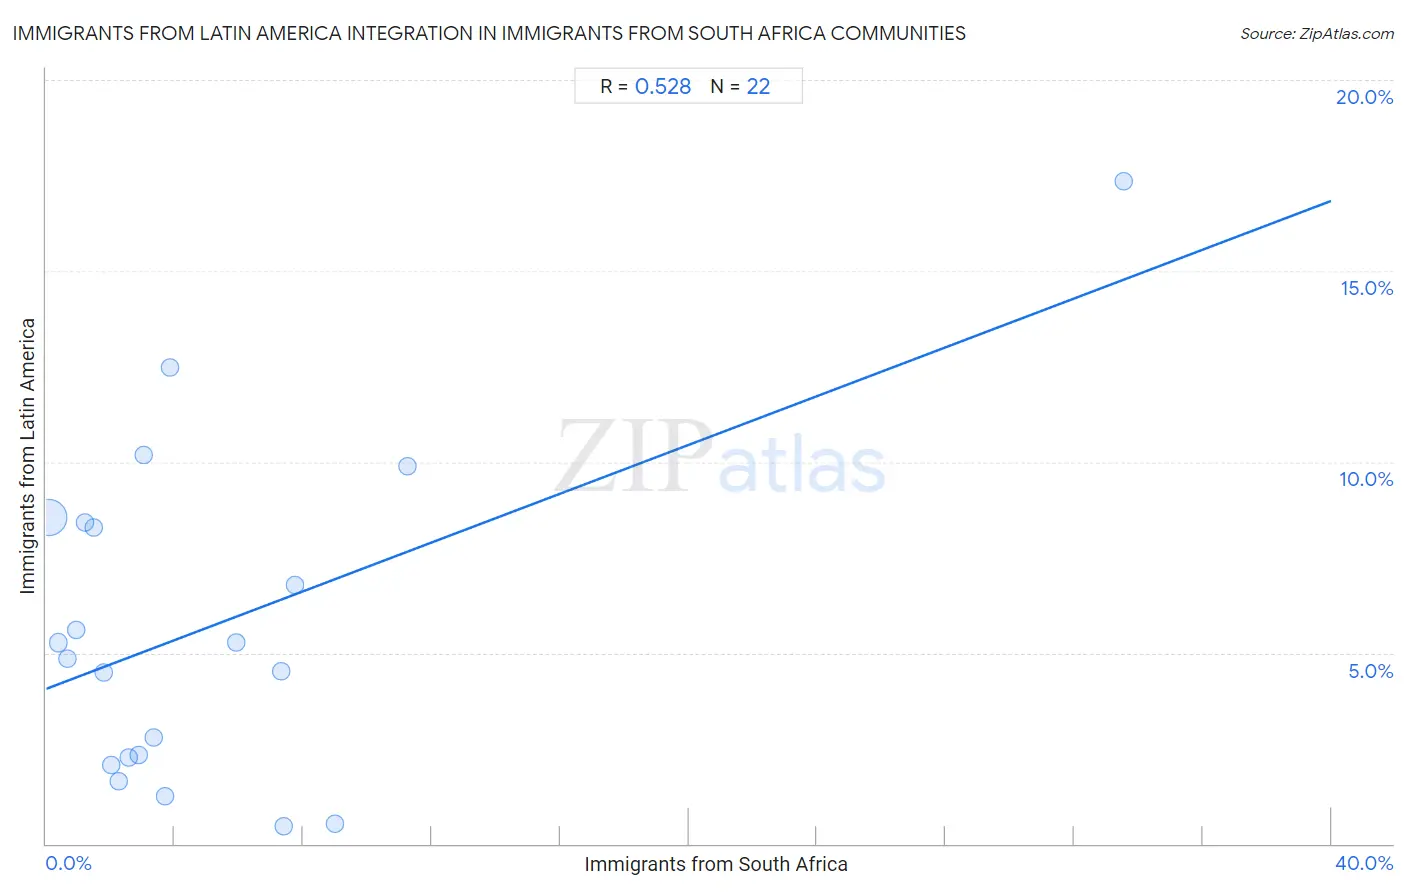 Immigrants from South Africa Integration in Immigrants from Latin America Communities